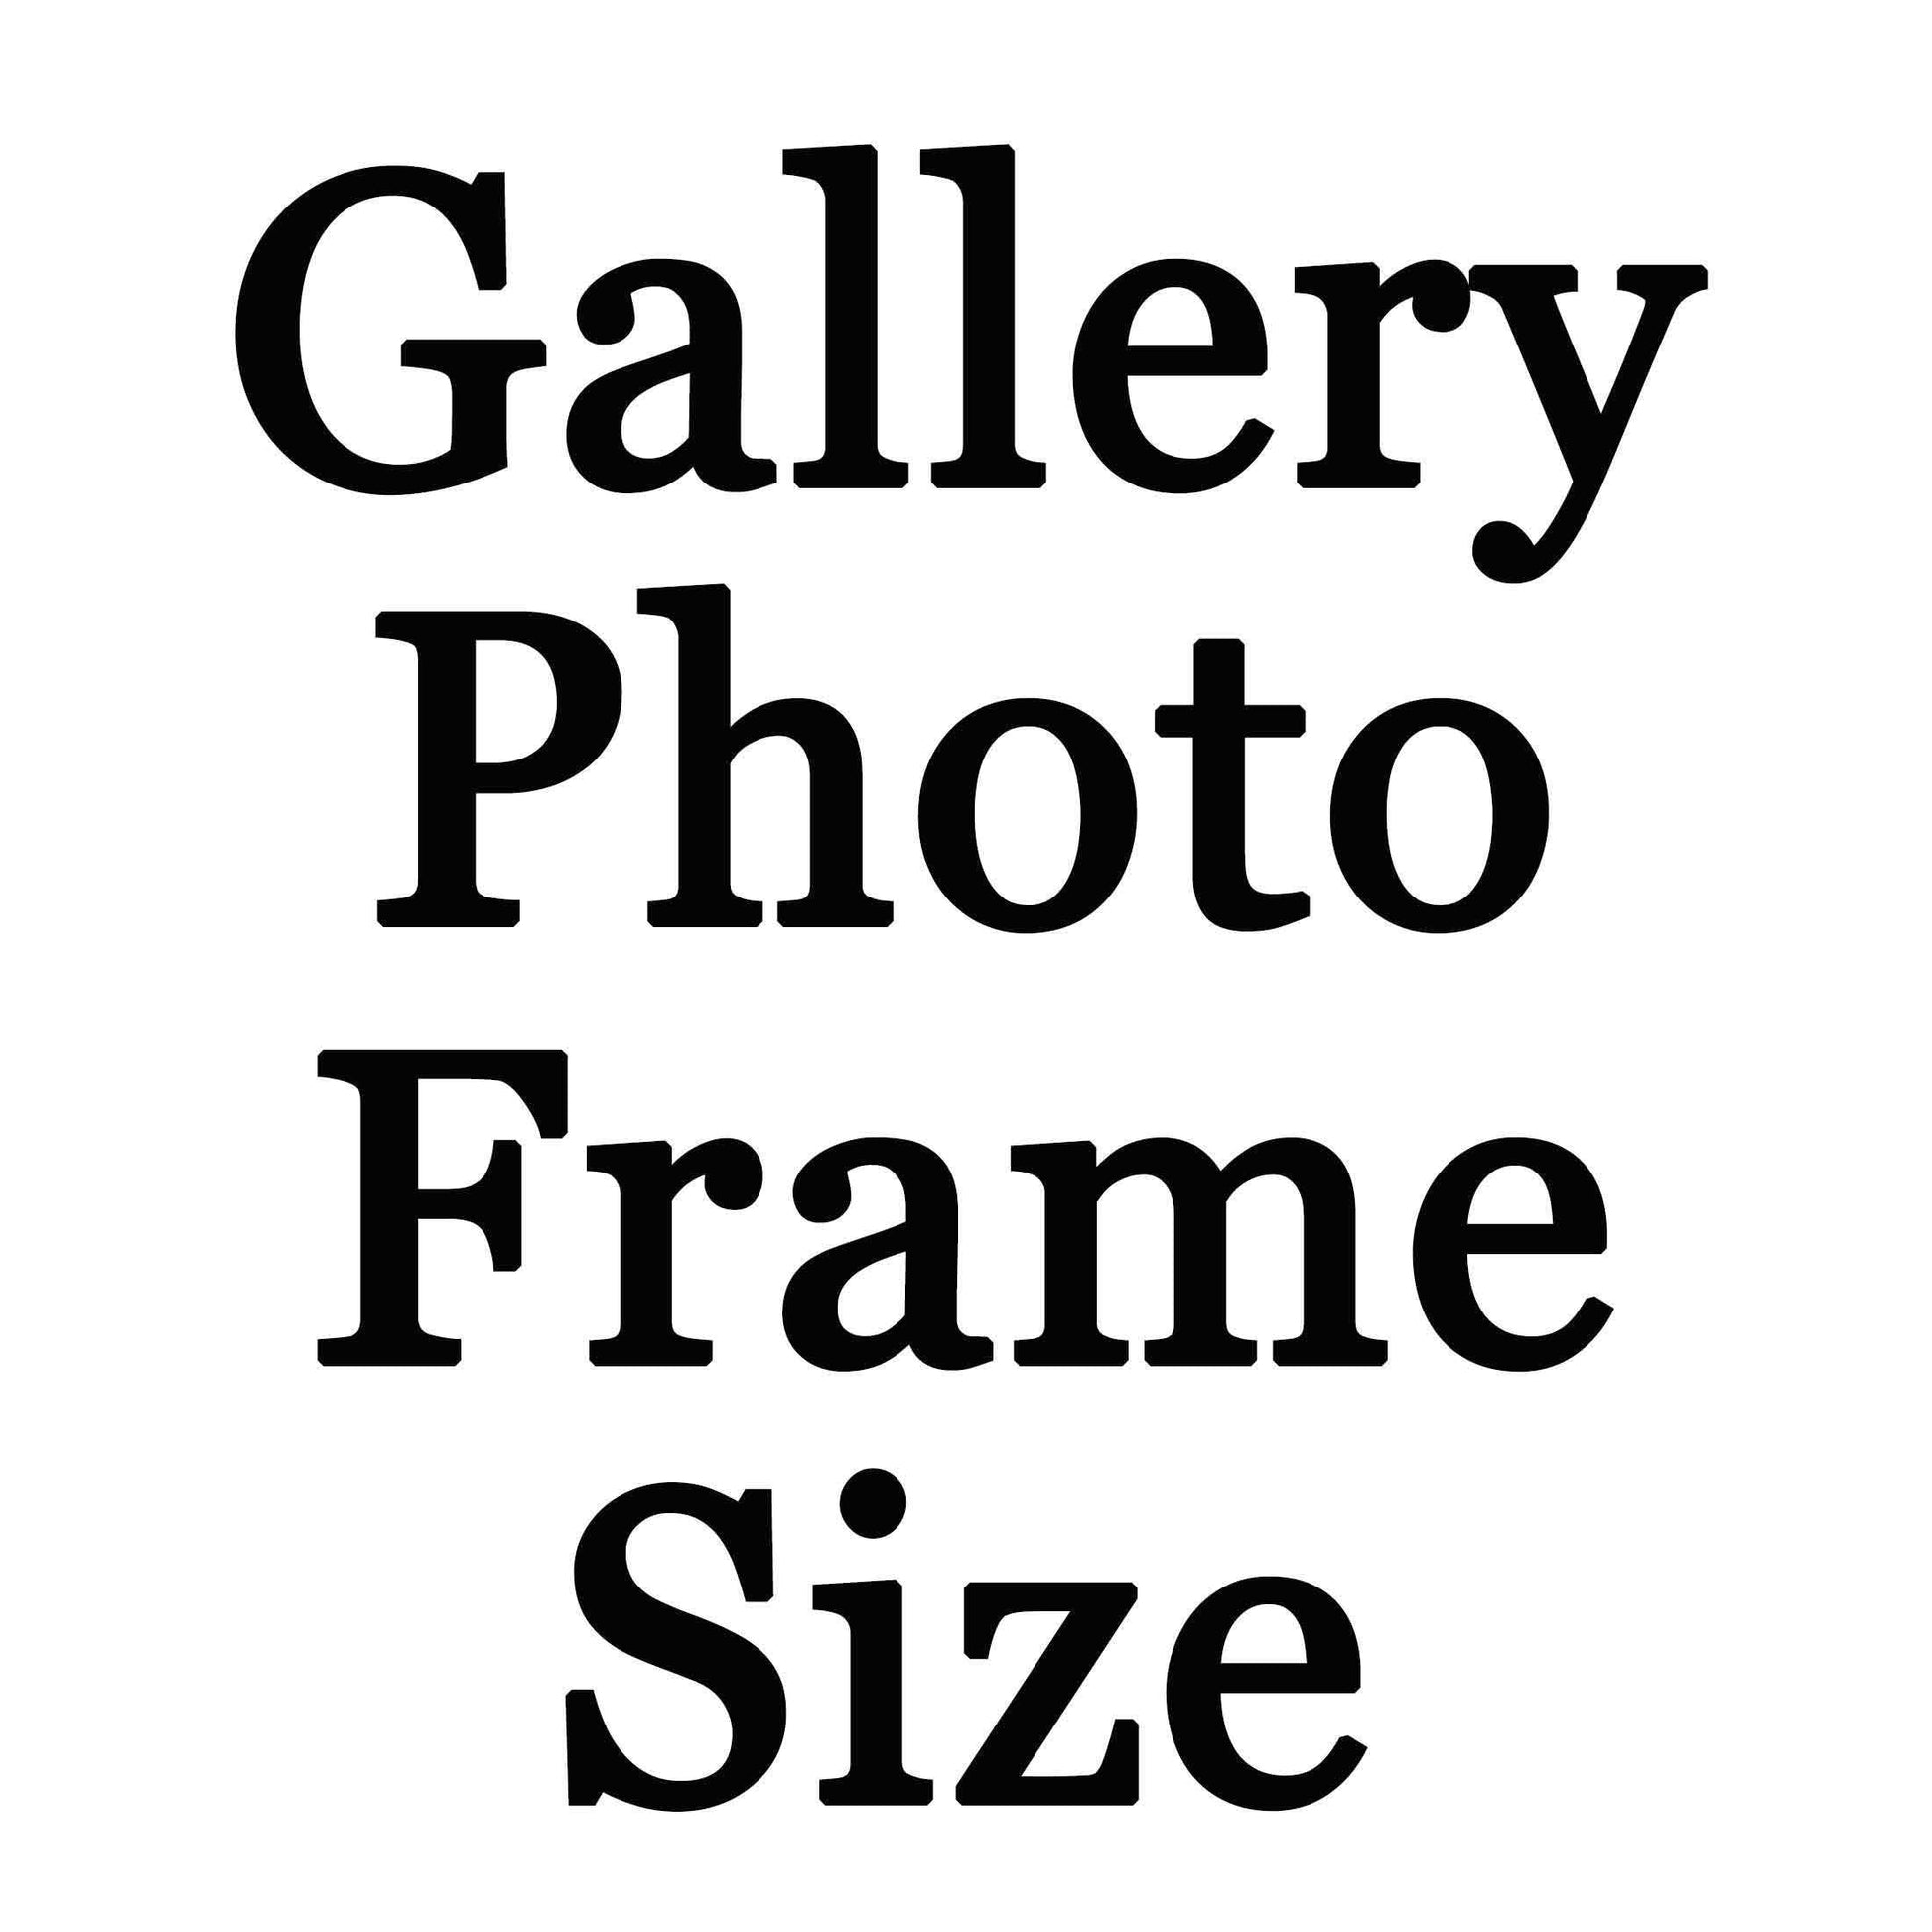 Gallery Photo Frame UPCHARGE for Size 16x16. This Option belongs to the Main Product. DON'T DELETE the Main Product or this Option if you want this Size - FromPicToArt